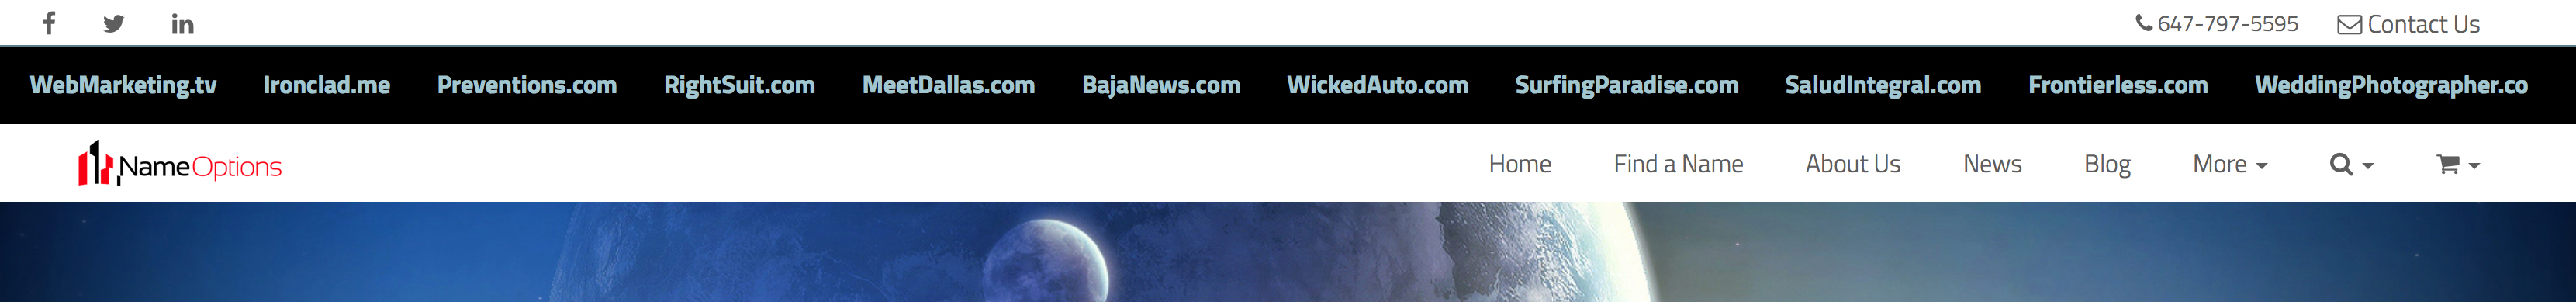 new navigation bar with domain scroller